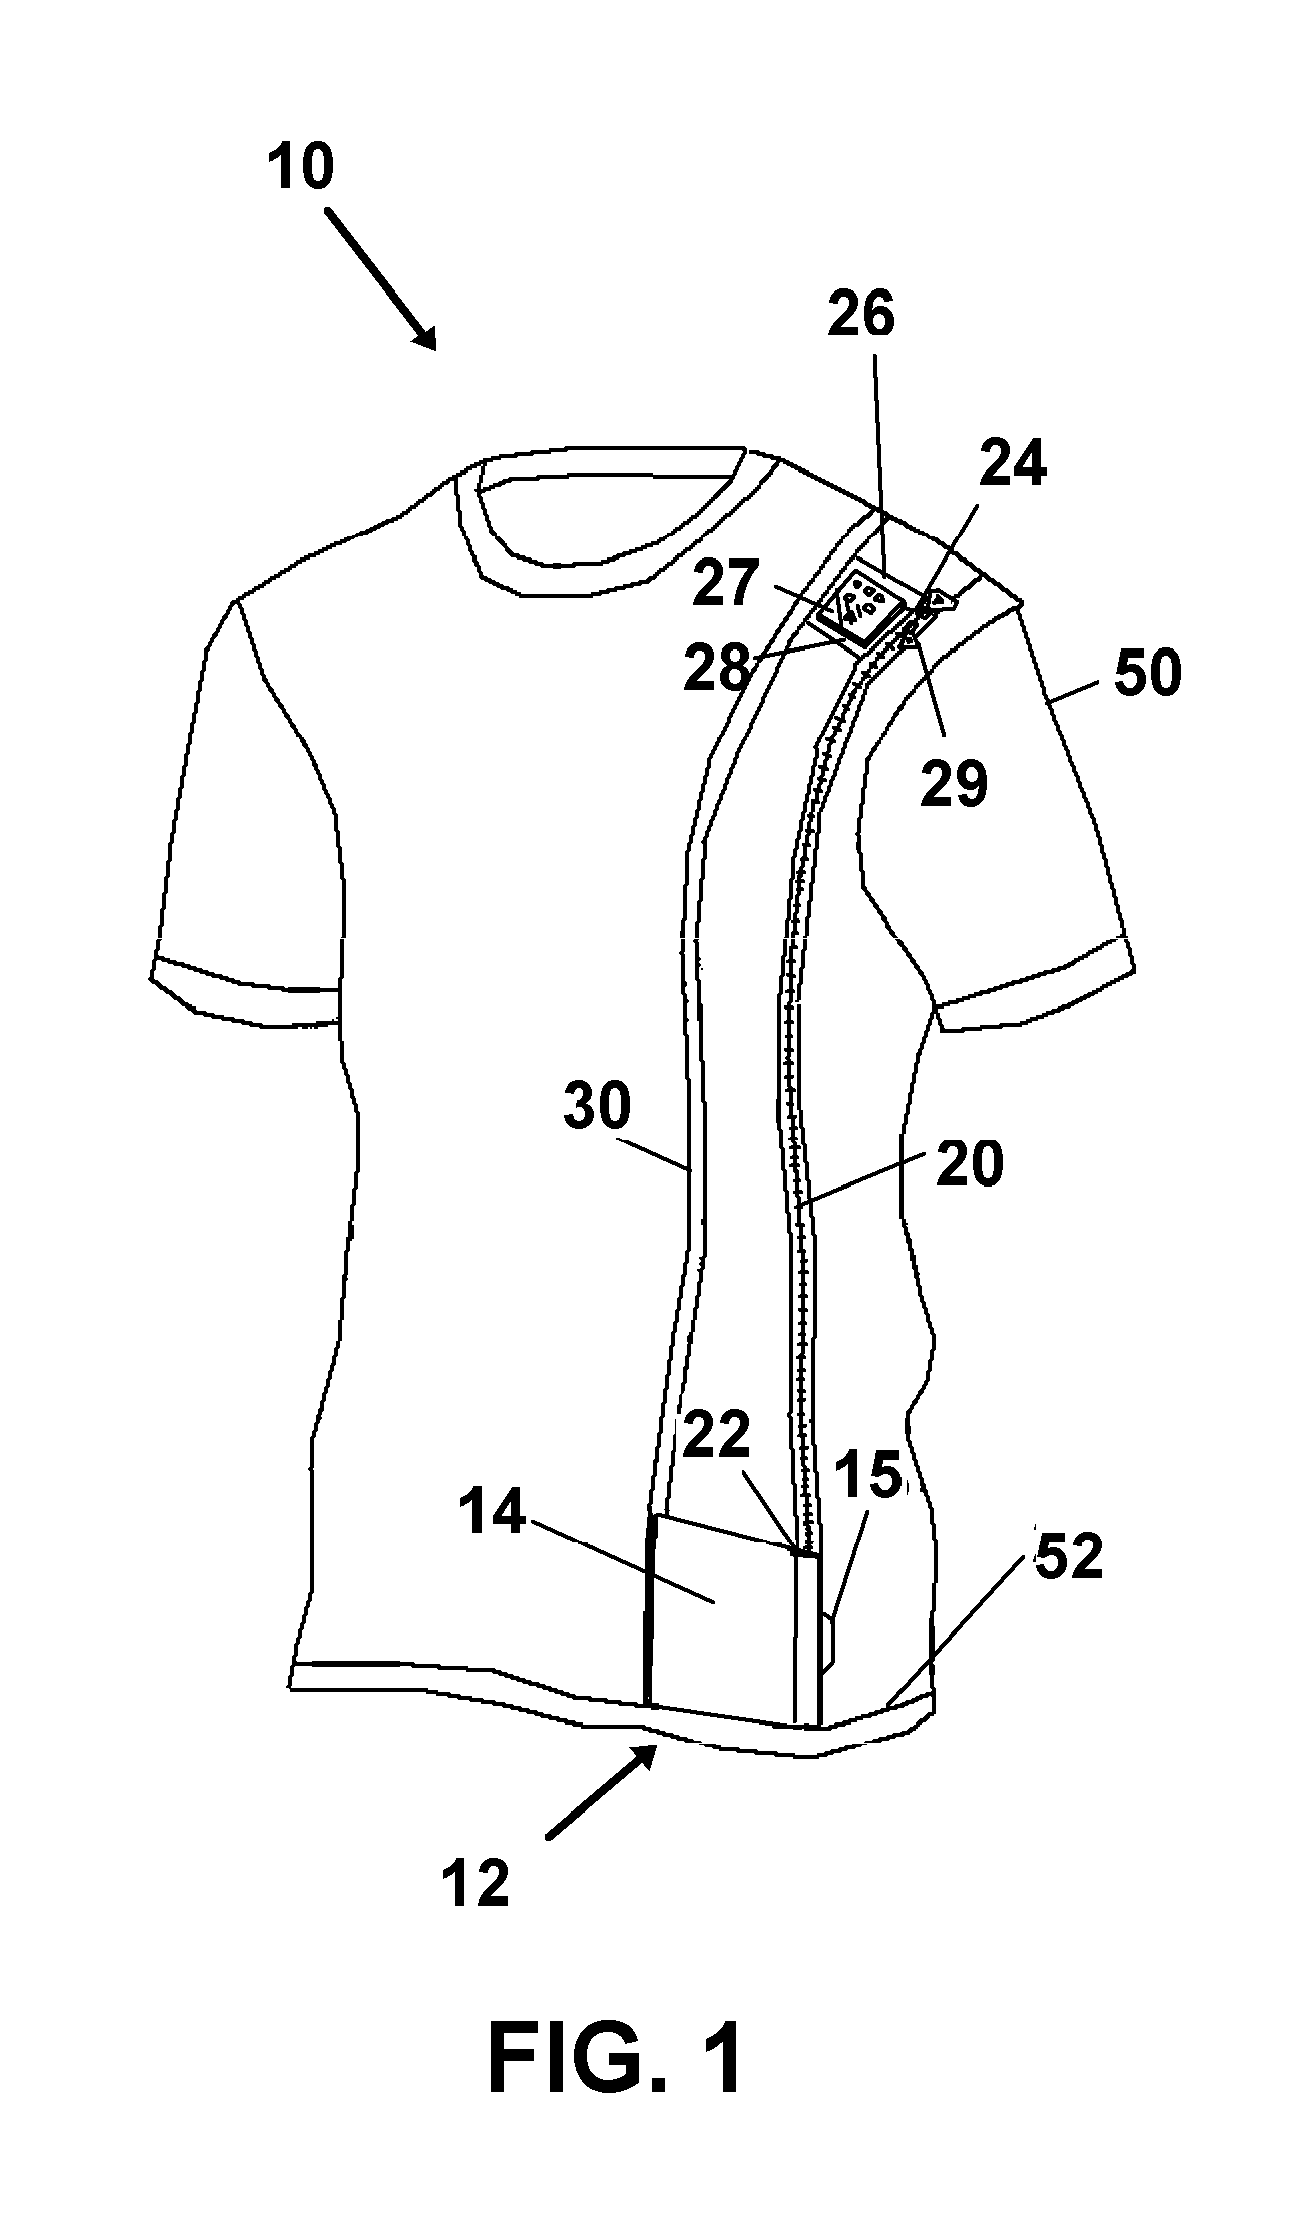 T-shirt Pocket for Touch Screen Mobile Devices